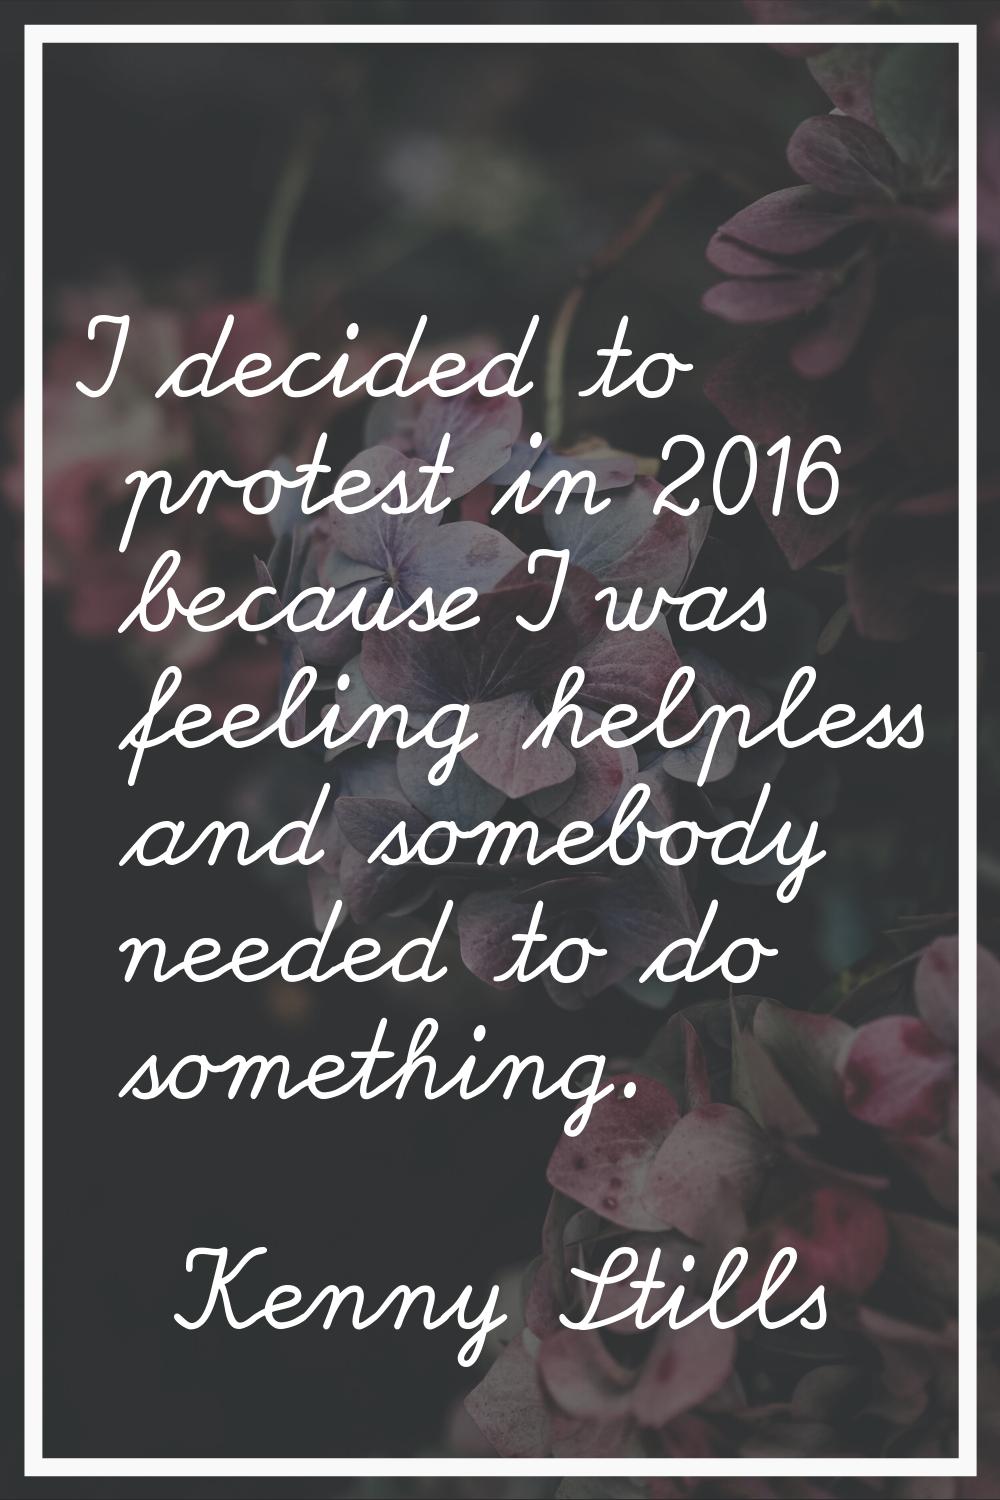 I decided to protest in 2016 because I was feeling helpless and somebody needed to do something.